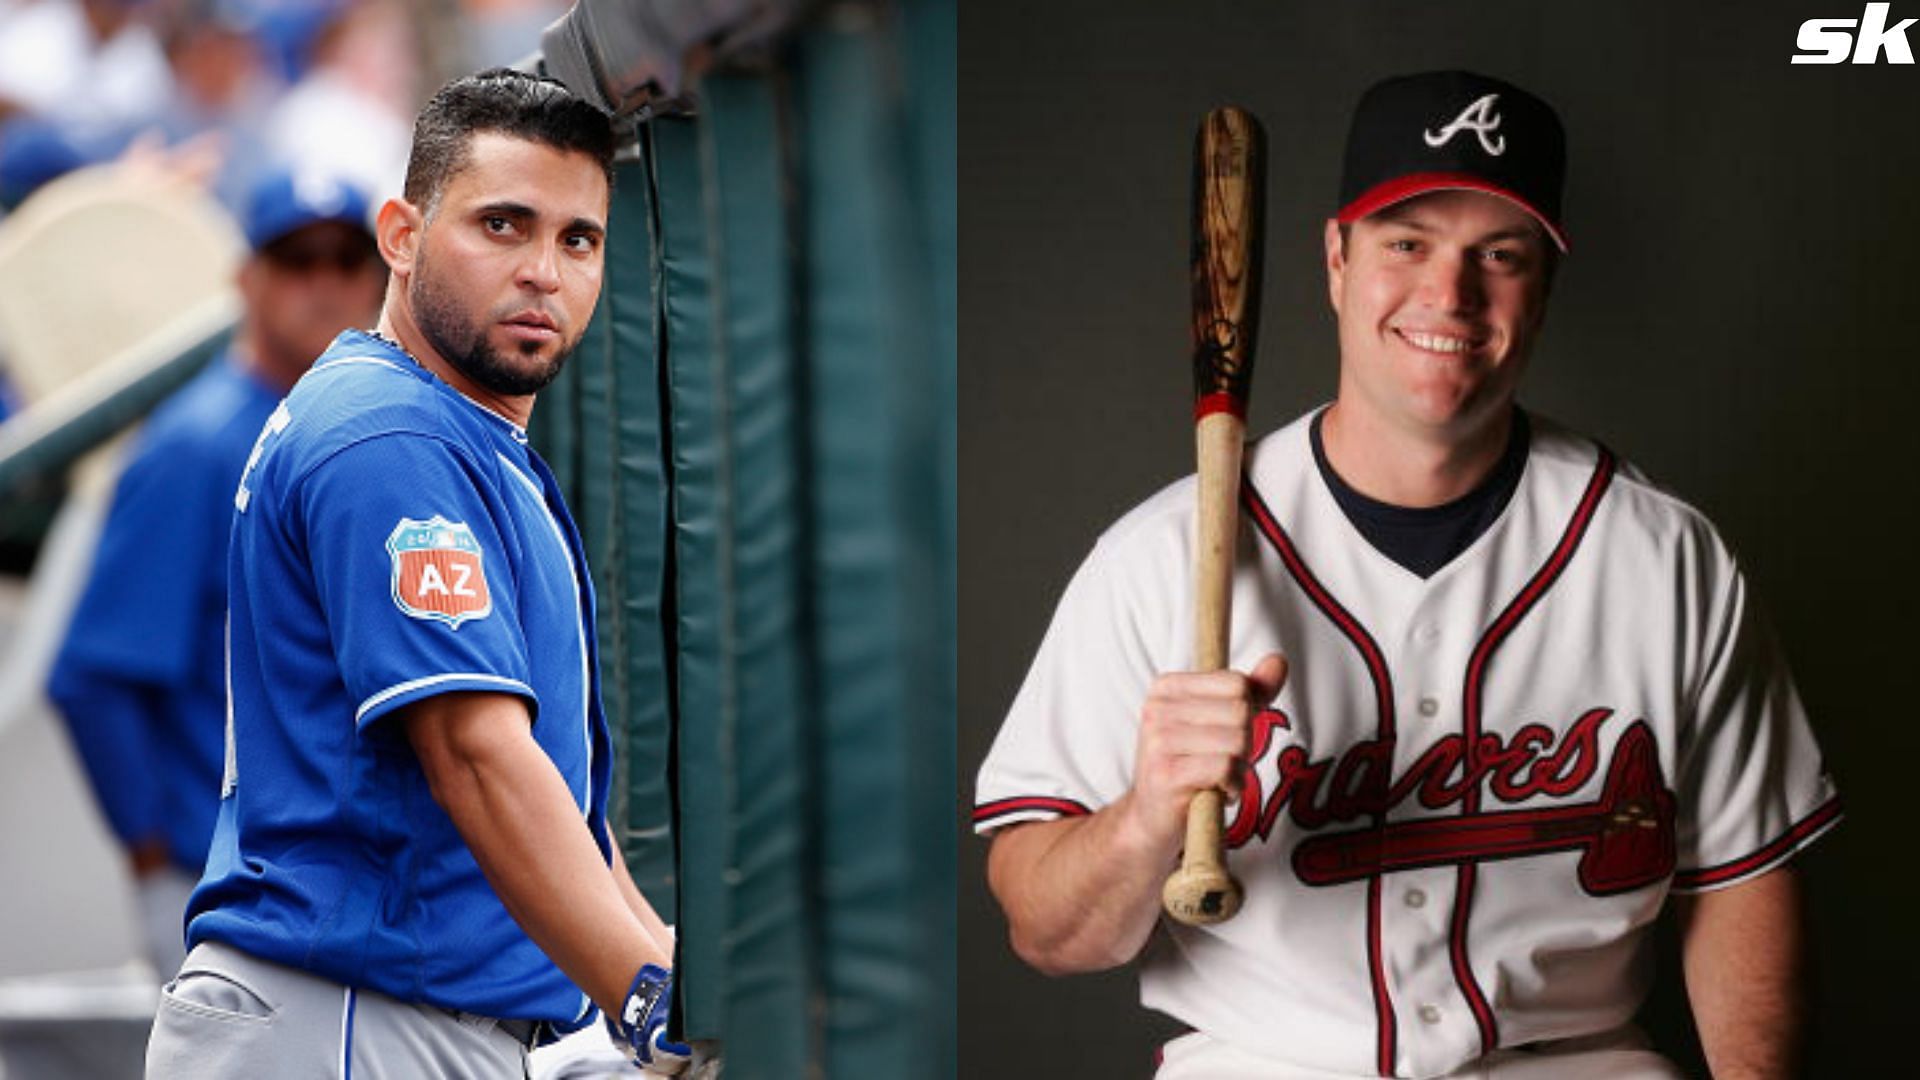 Which Braves players have also played for the Royals? MLB Immaculate Grid Answers September 21